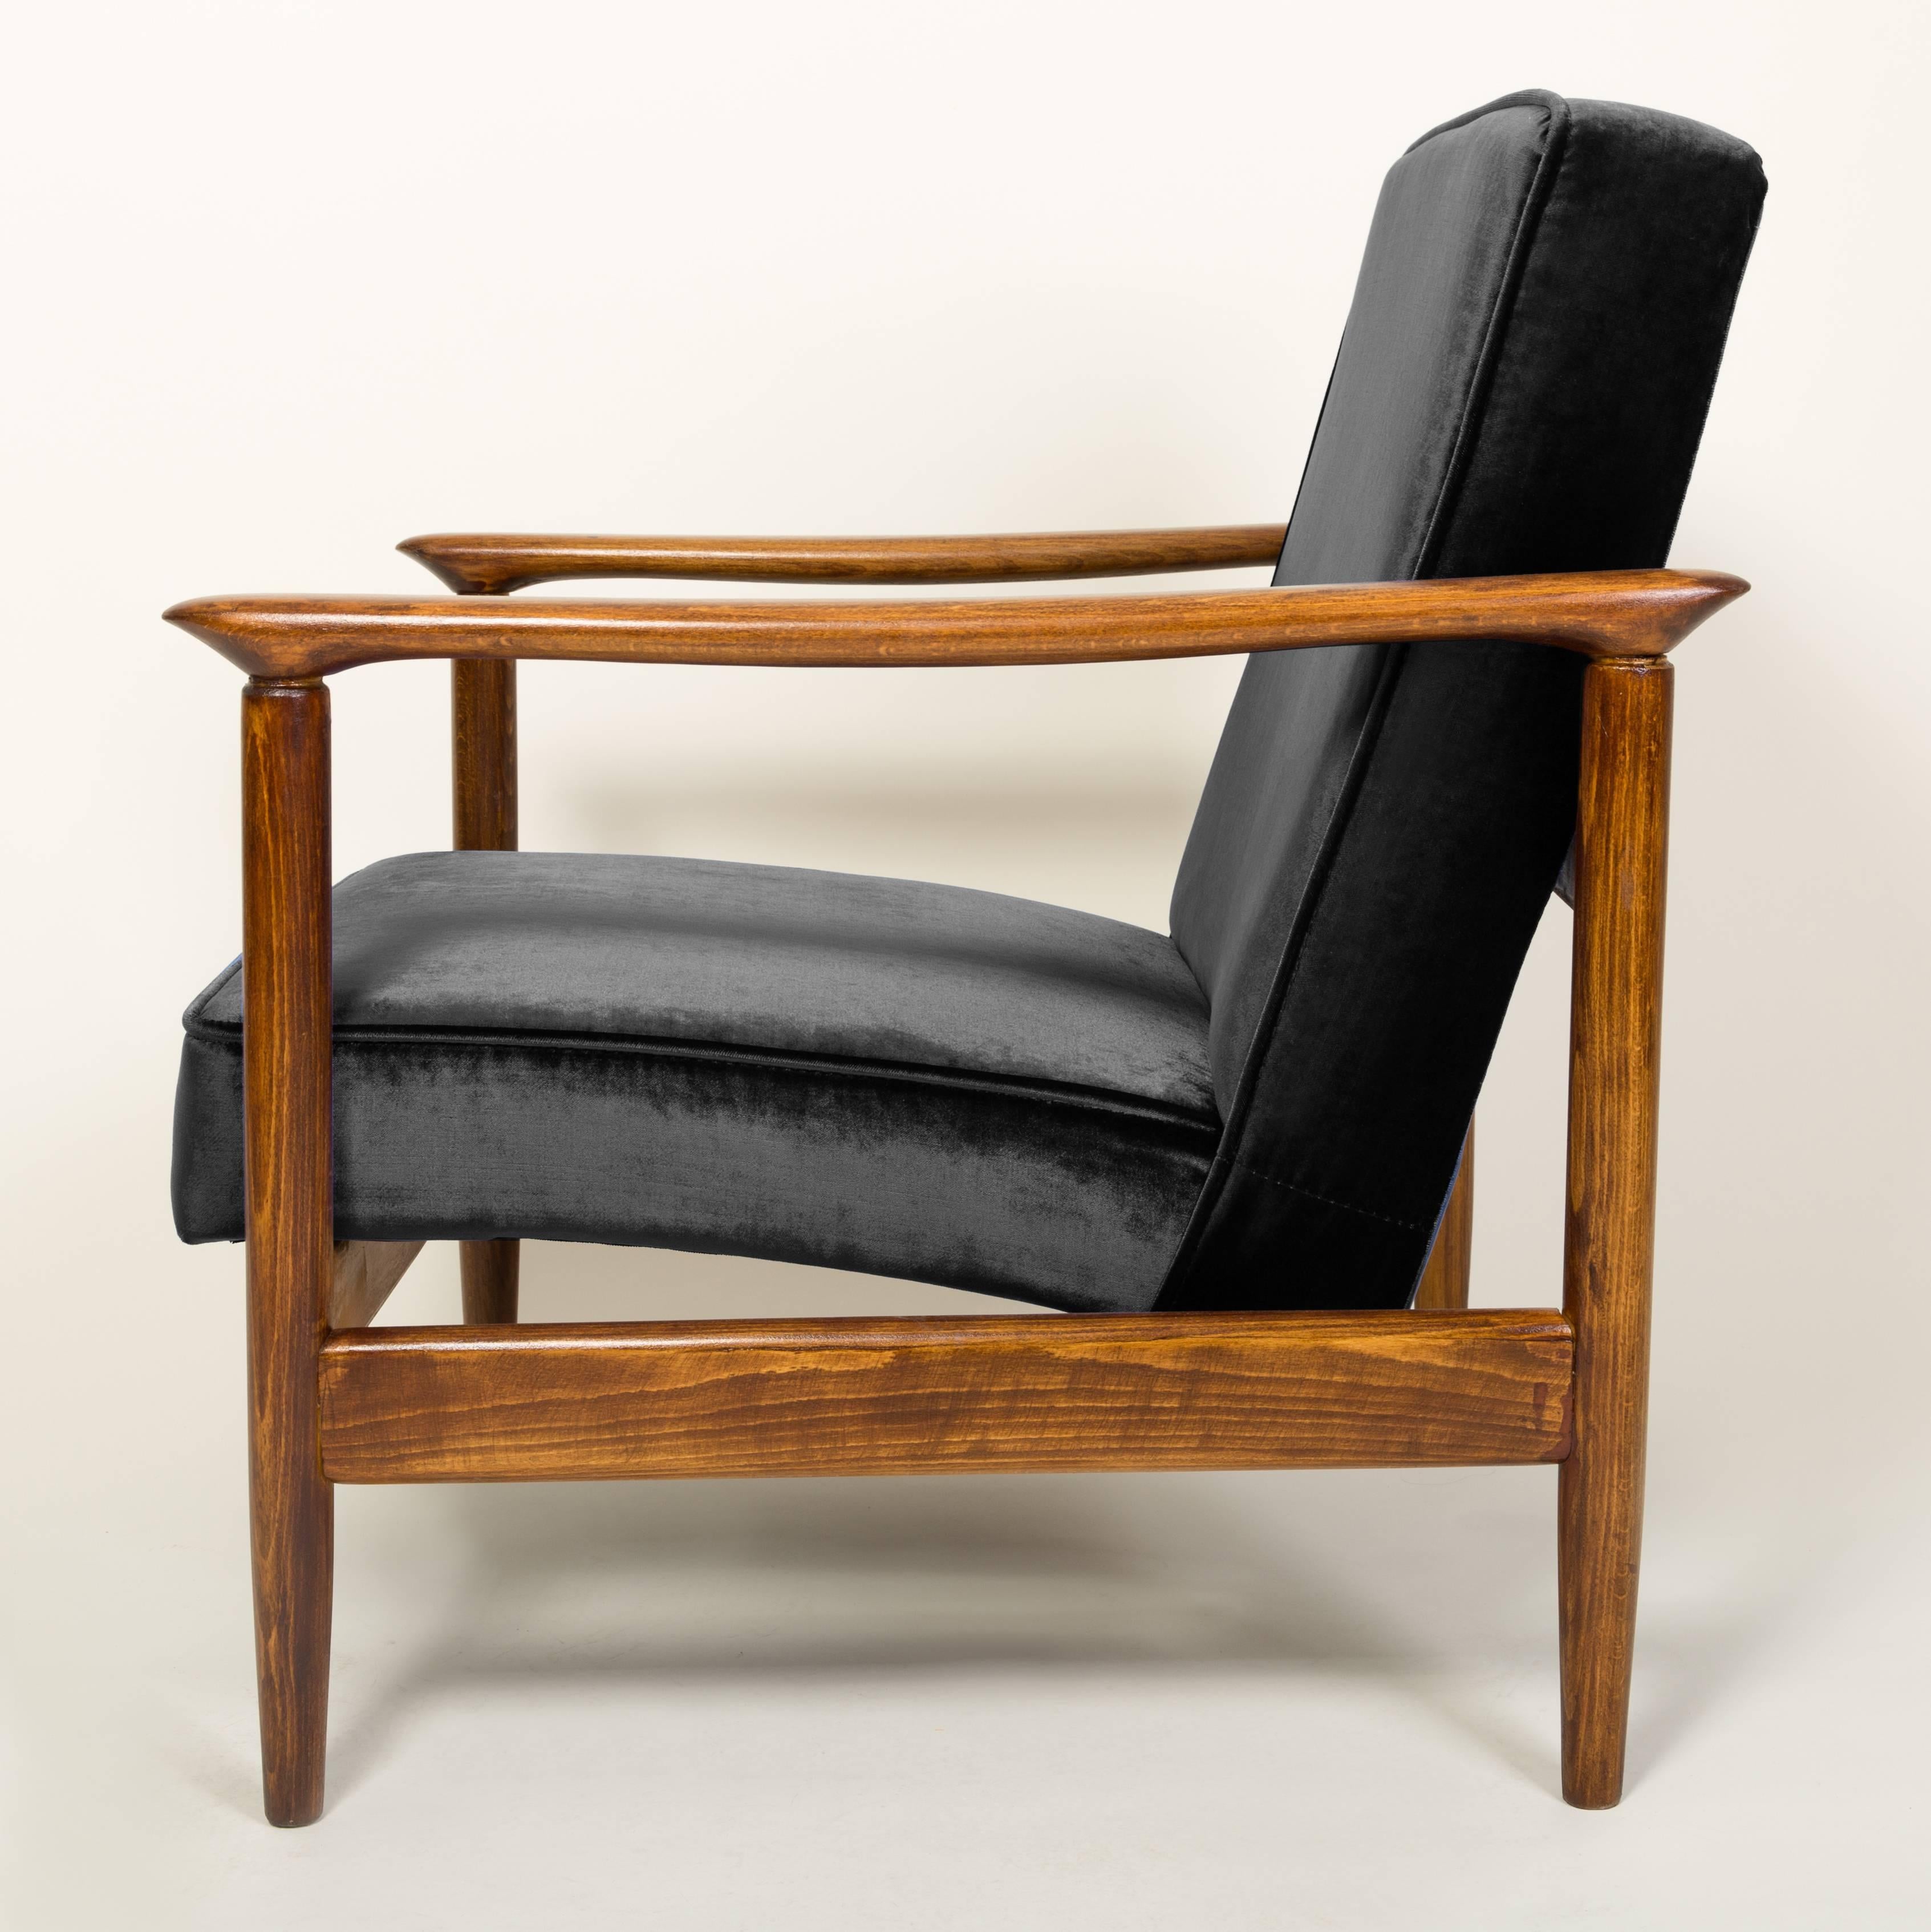 Beautiful armchair model GFM-142, designed by Edmund Homa. The armchair was made in the 1960s in the Gosciecinska Furniture Factory. Frame is made from solid beech wood. The GFM-142 armchair is regarded one of the best Polish armchair design from